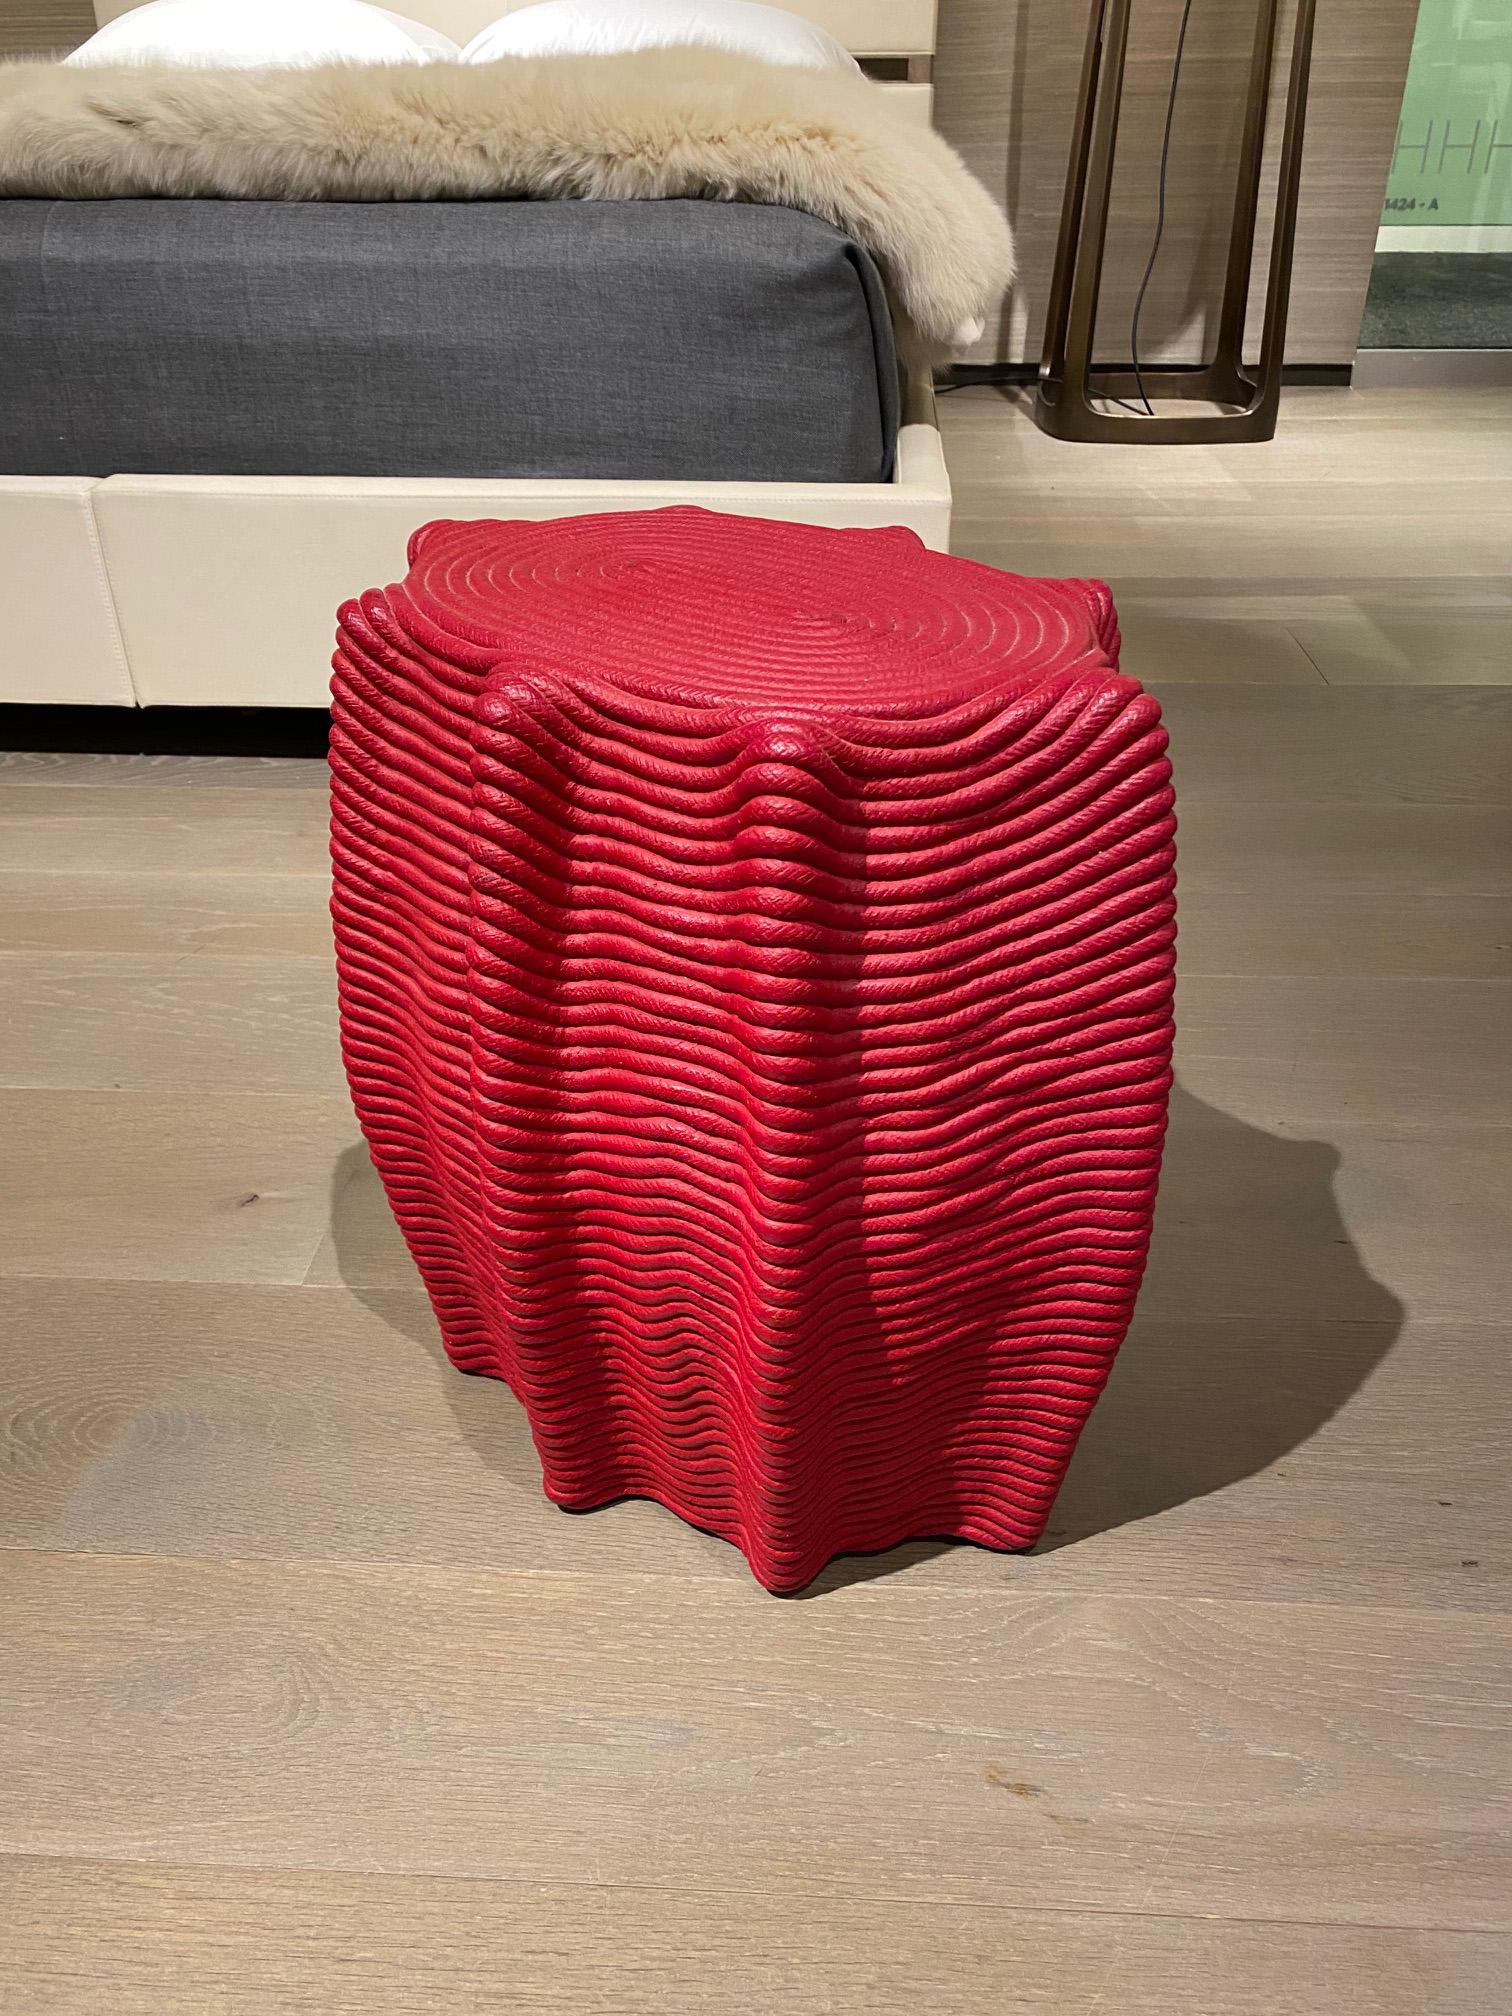 American HOLLY HUNT Mivalo Stool in Carmin Red Cotton Cord by Christian Astuguevieille